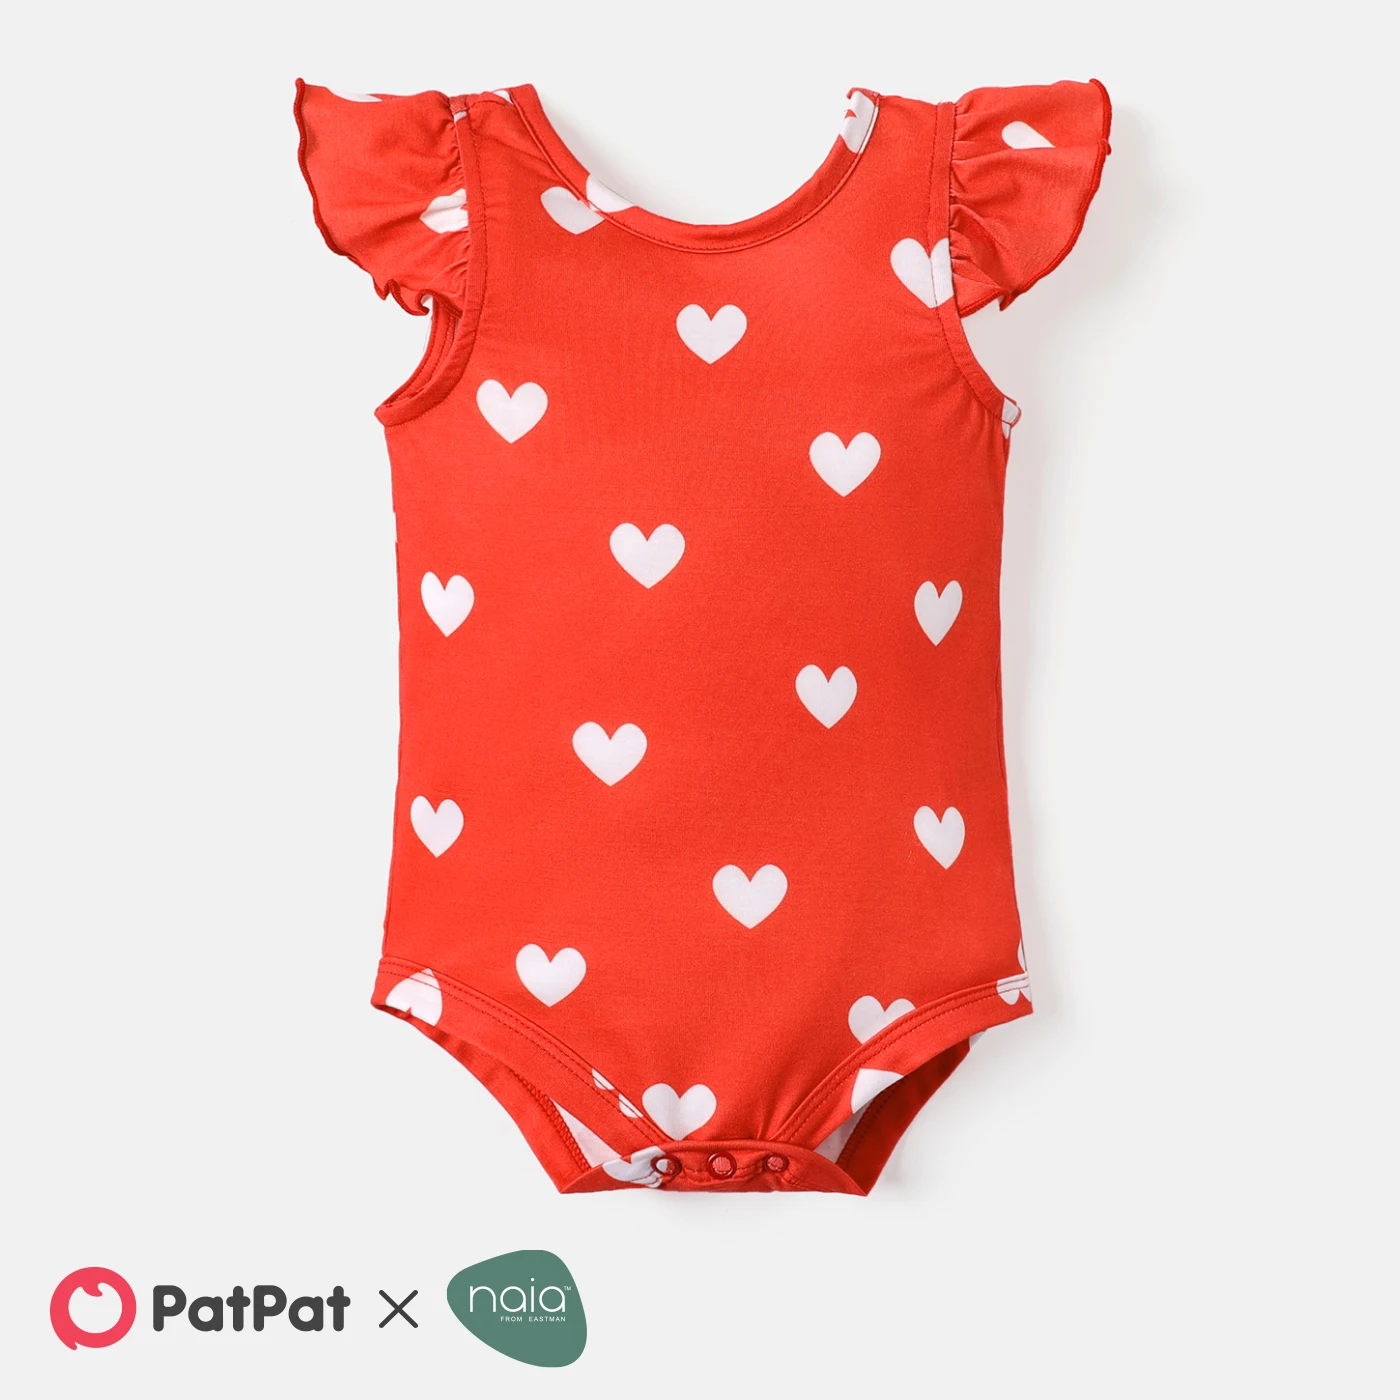 

PatPat Valentine's Day Baby Girl Naia Allover Heart Print Bow Decor Flutter-sleeve Romper